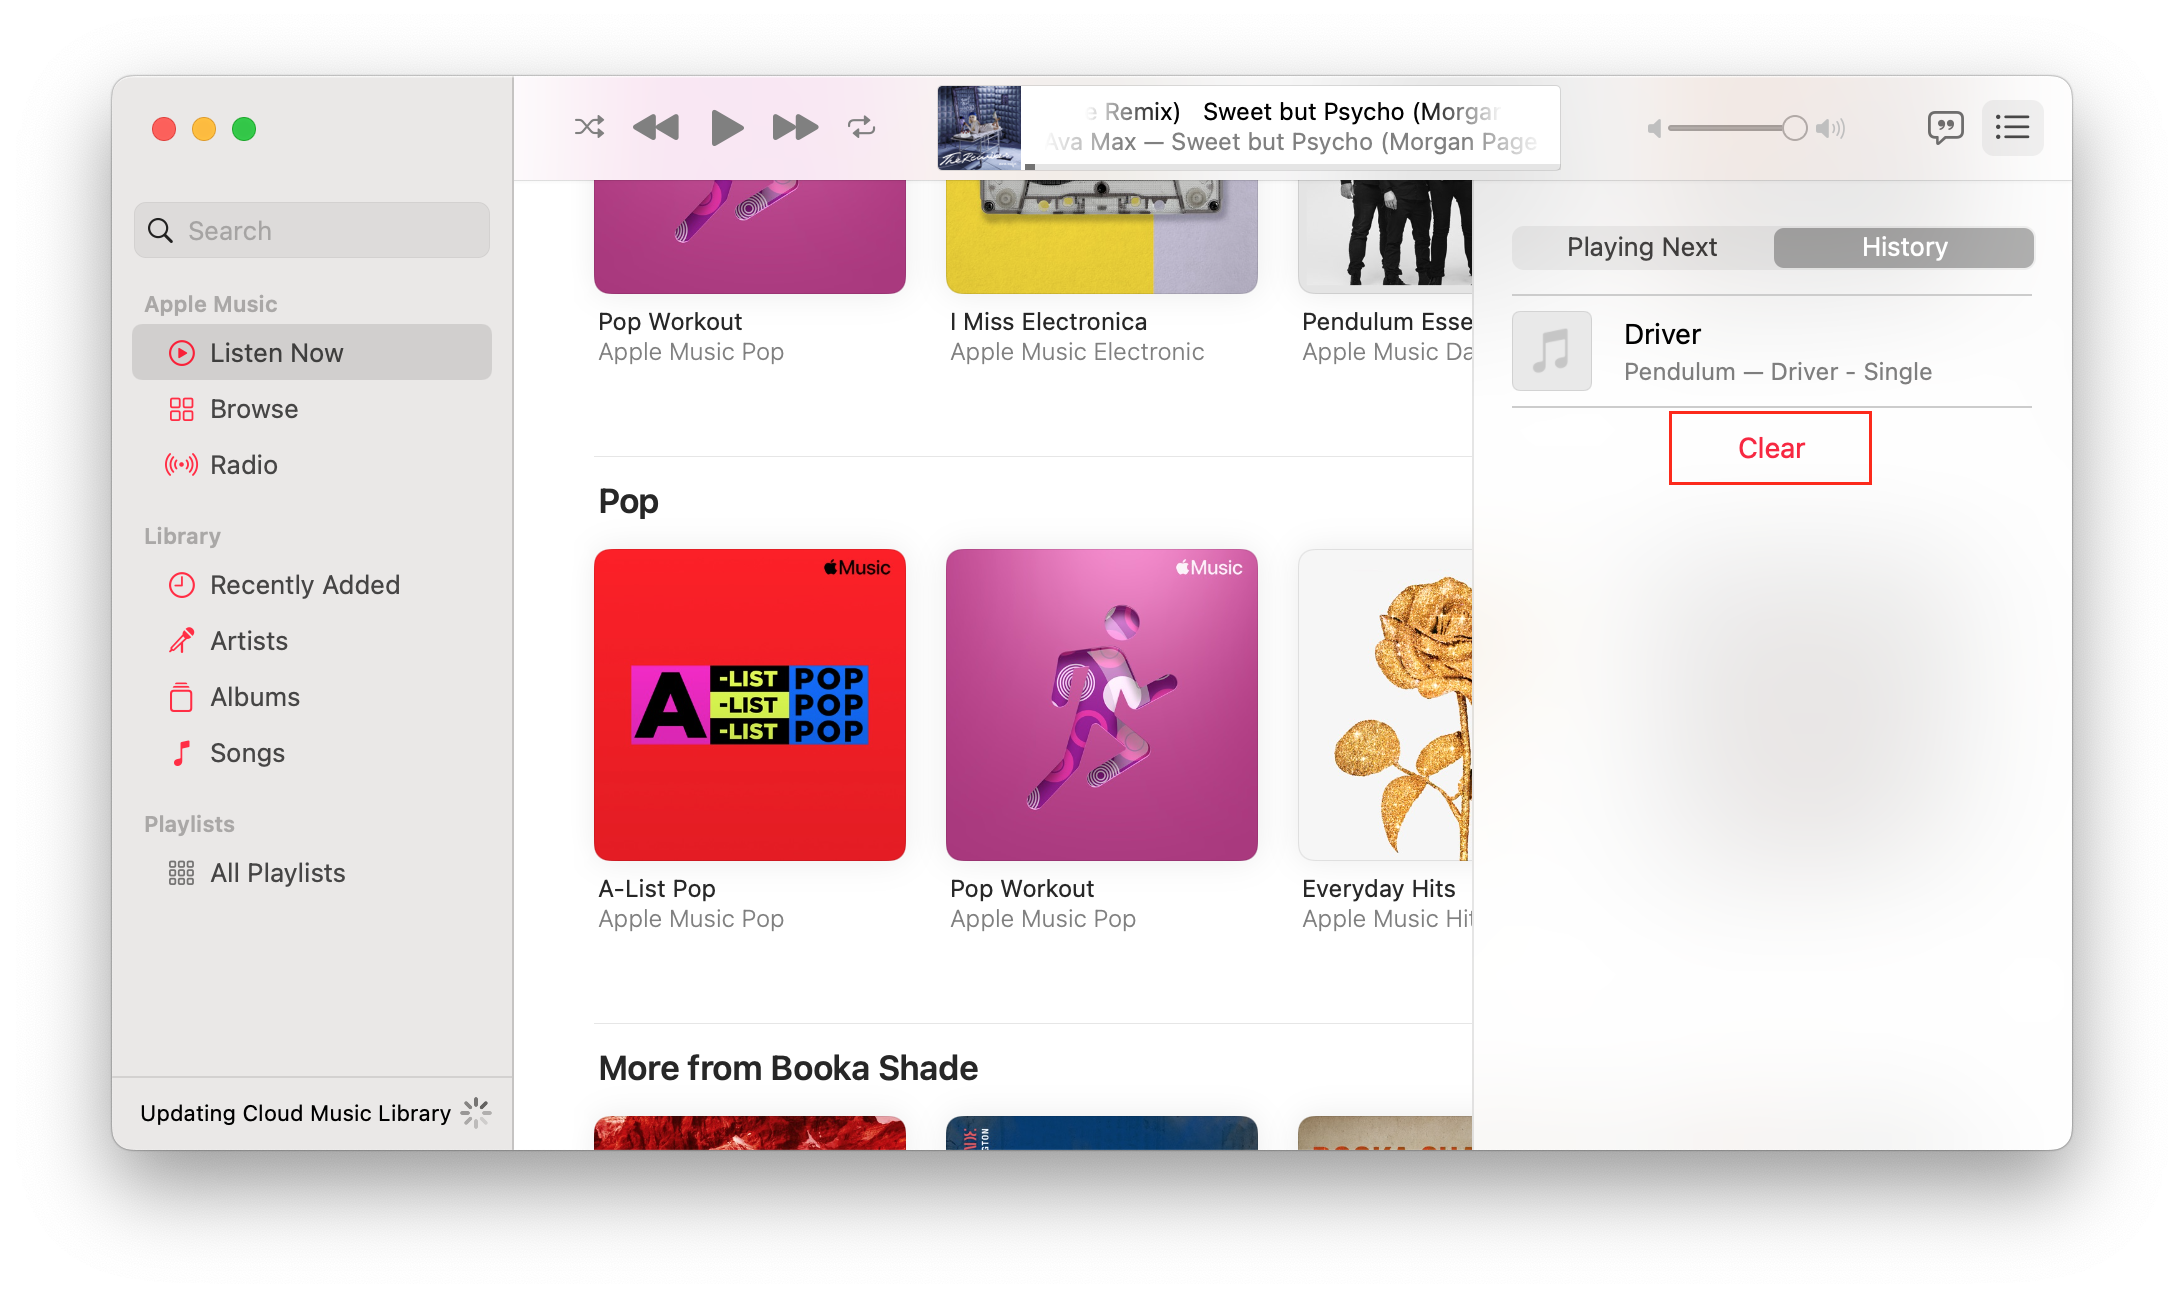 clearing history in Apple Music on a Mac